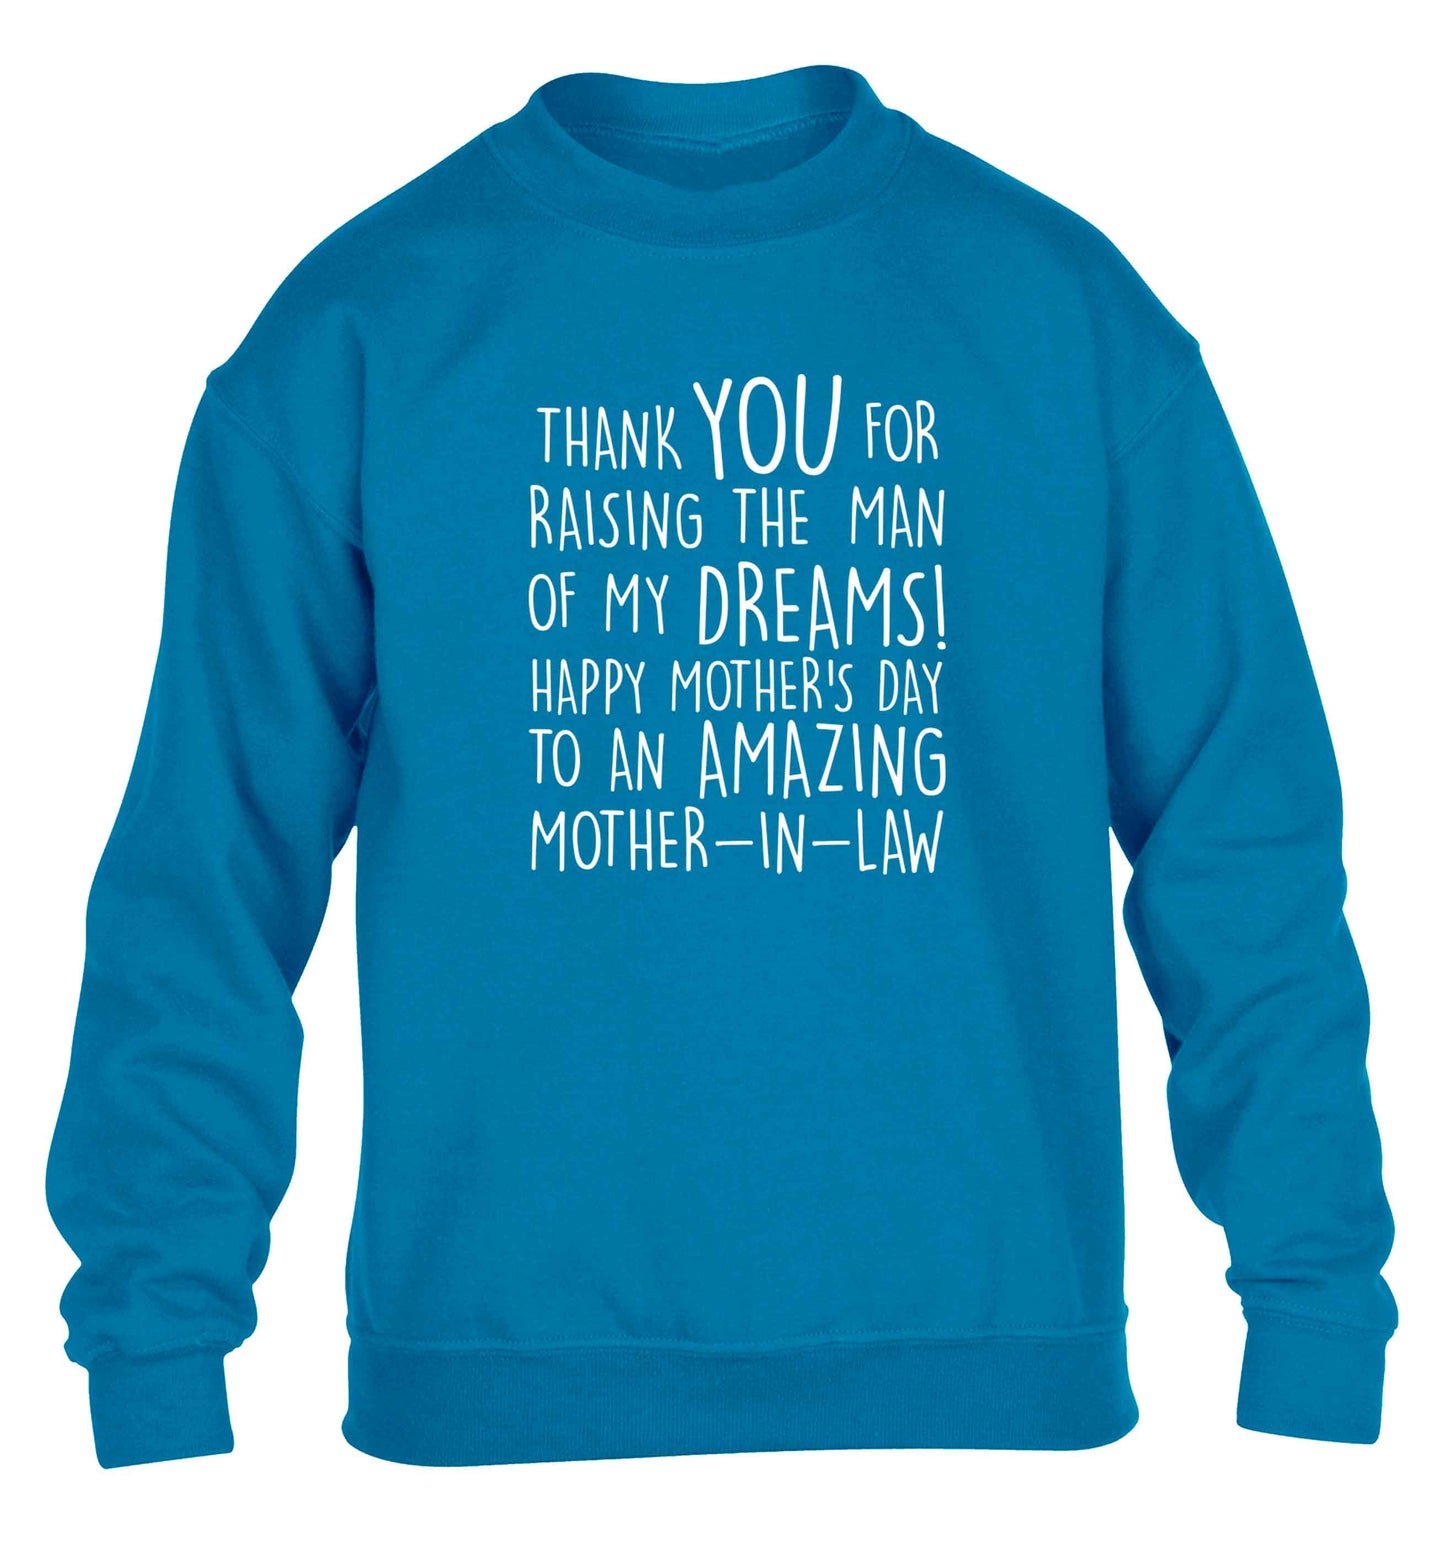 Raising the man of my dreams mother's day mother-in-law children's blue sweater 12-13 Years